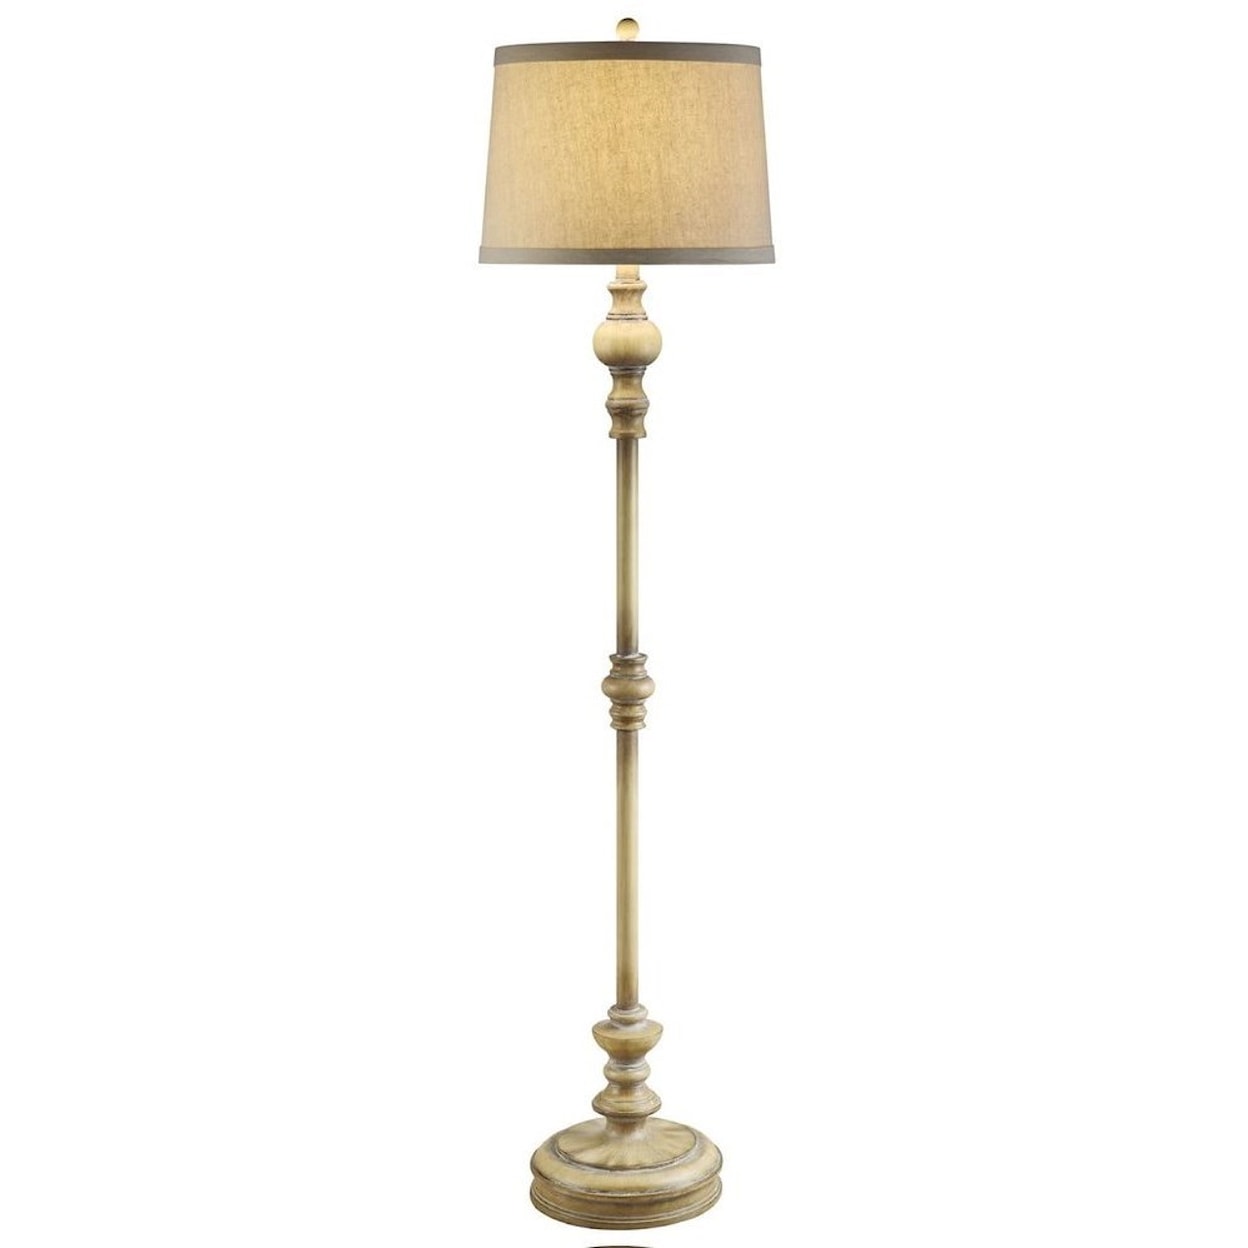 Crestview Collection Lighting Shady Cove Floor Lamp